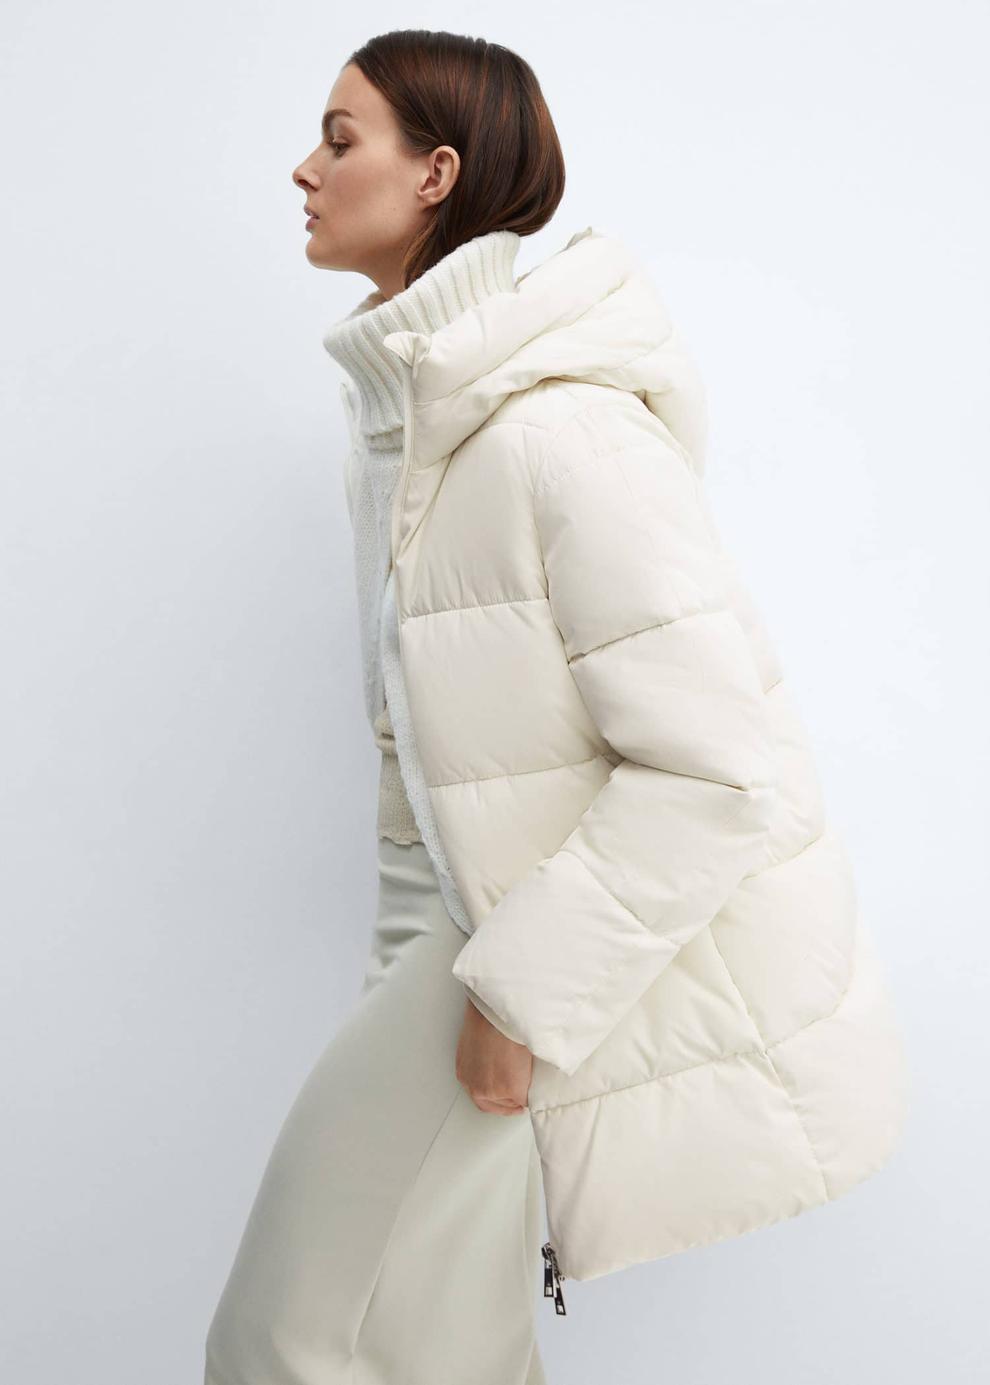 Hood quilted coat offers at S$ 89.9 in Mango